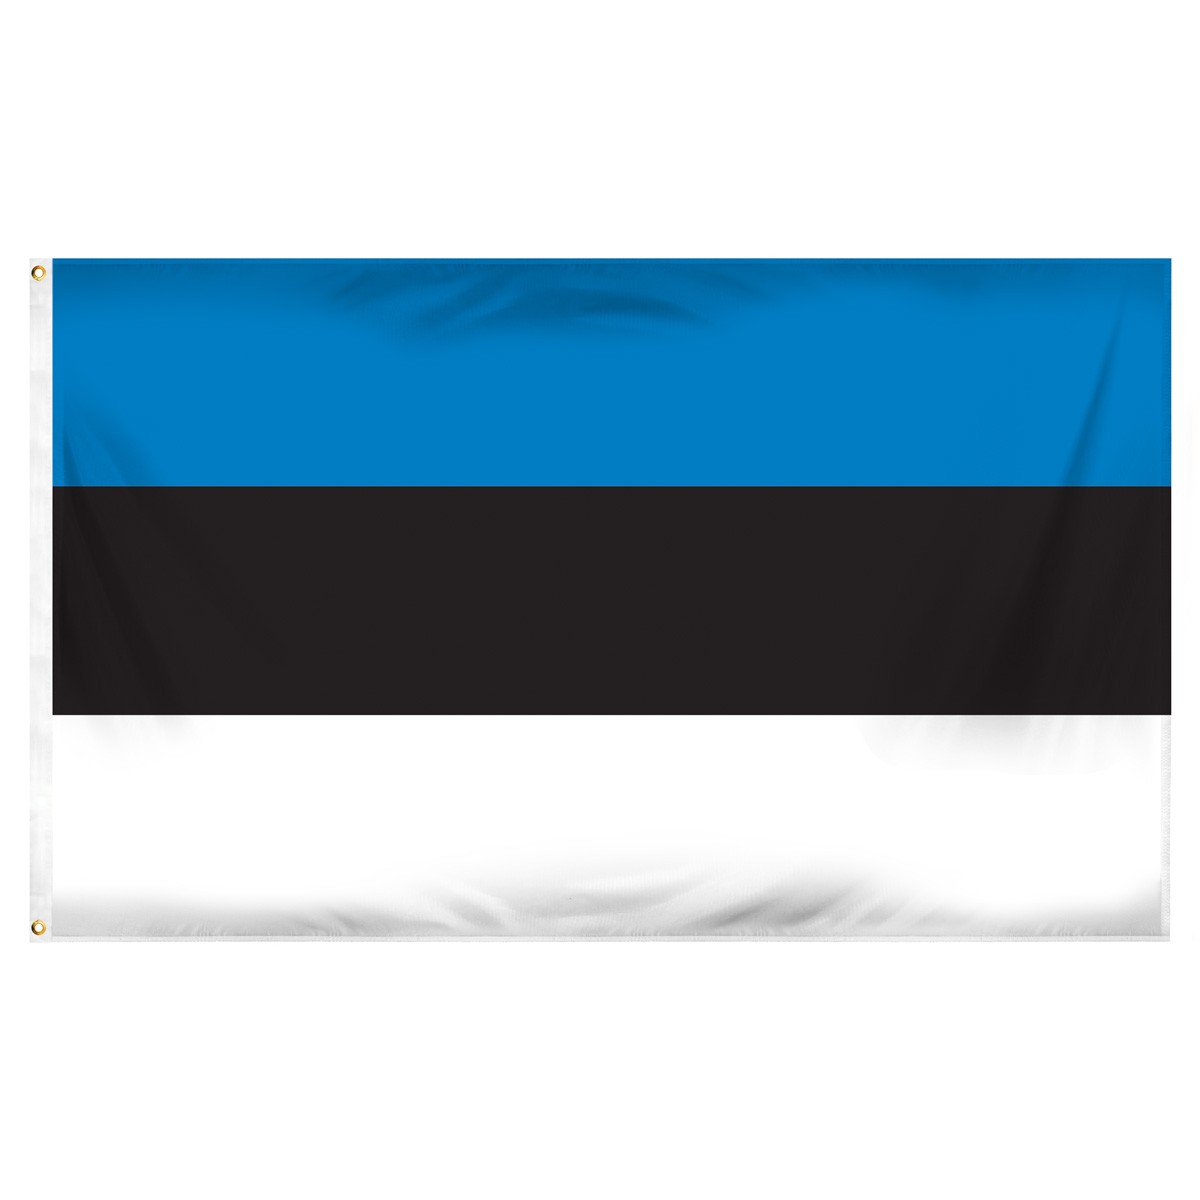 Estonia Building Pennants and Flags